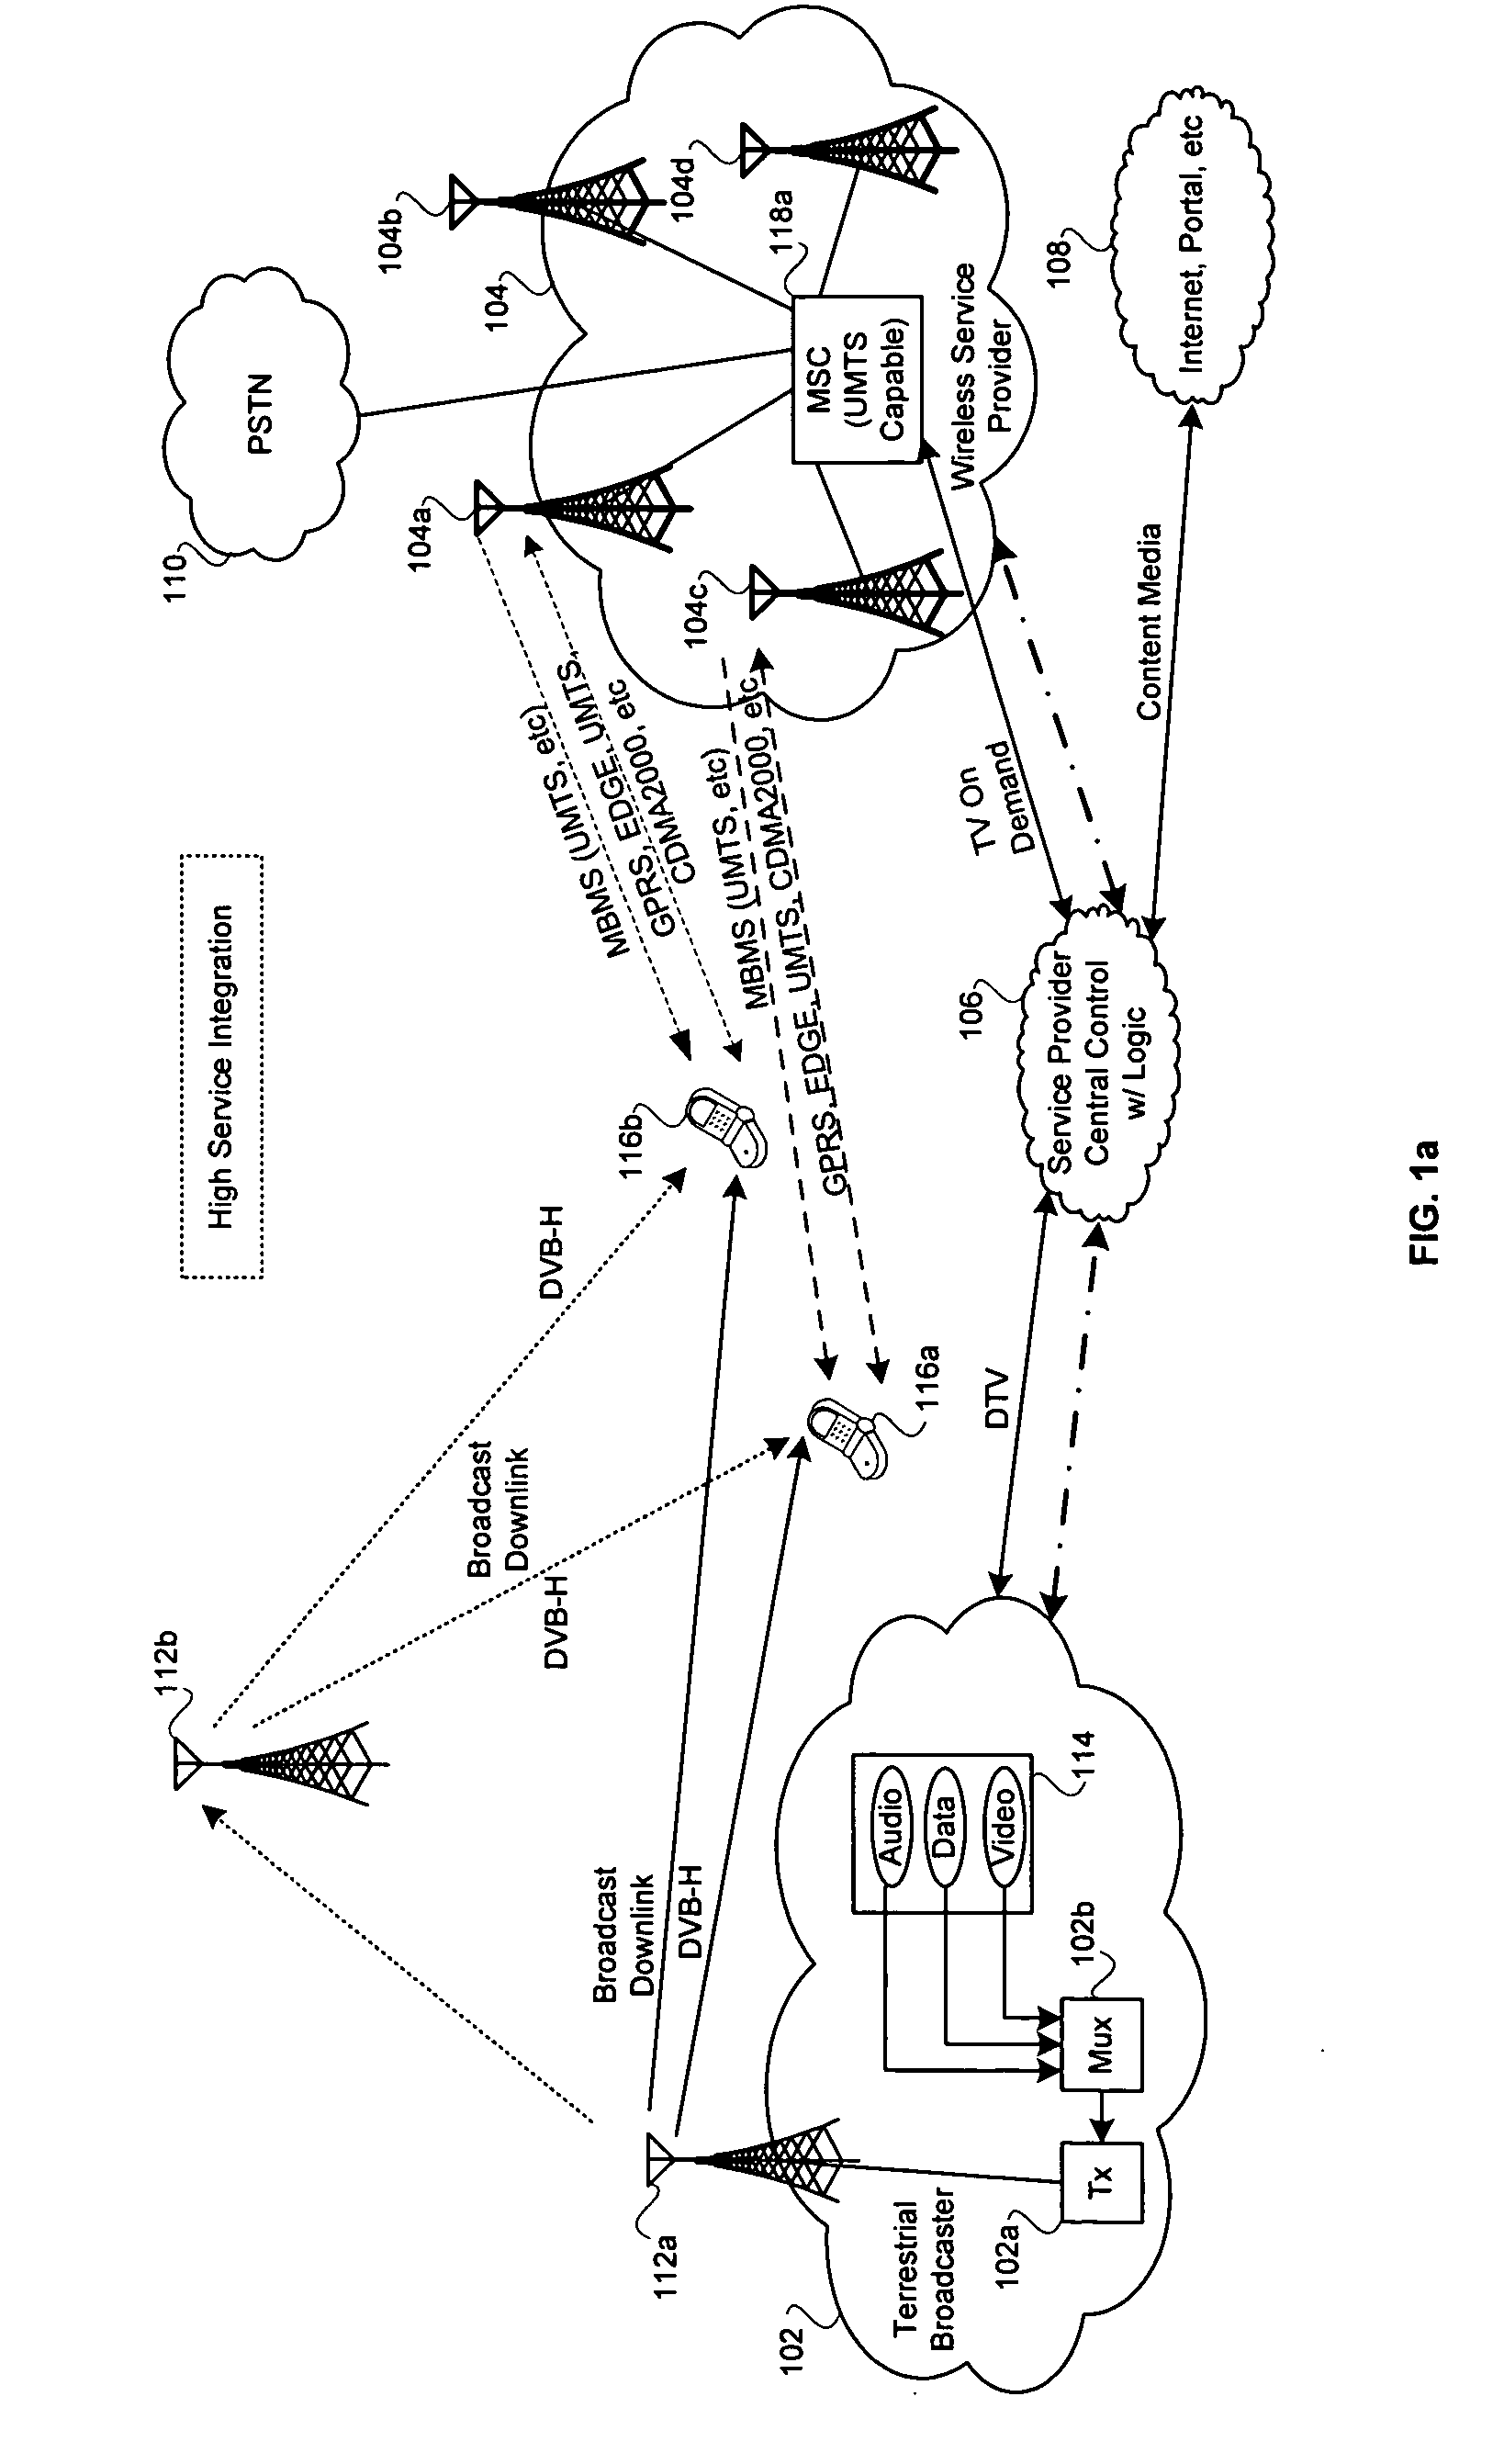 Method and system for mobile receiver antenna architecture for us band cellular and broadcasting services